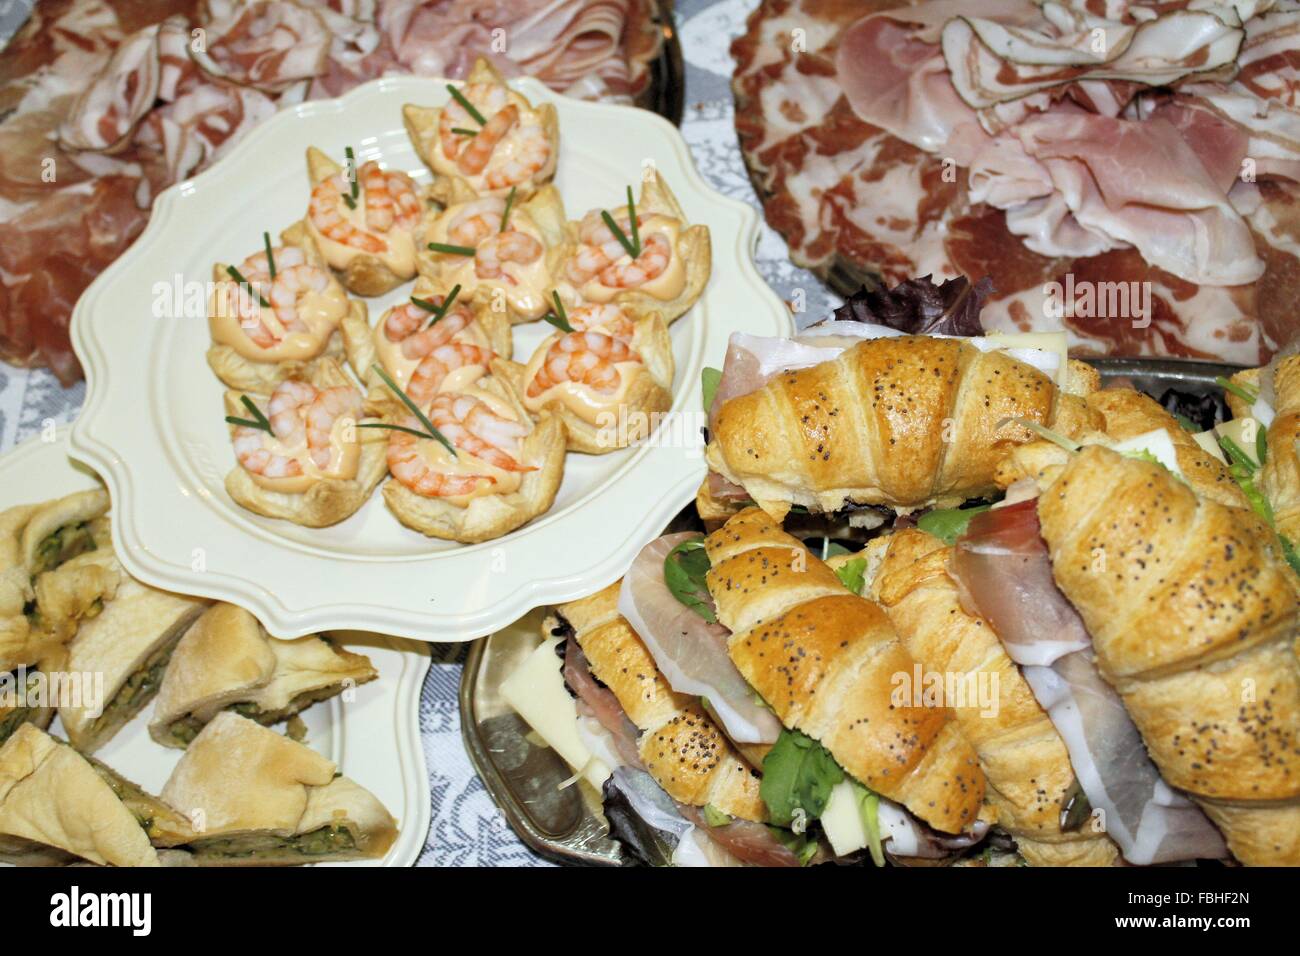 table laid with various dishes of appetizers Stock Photo